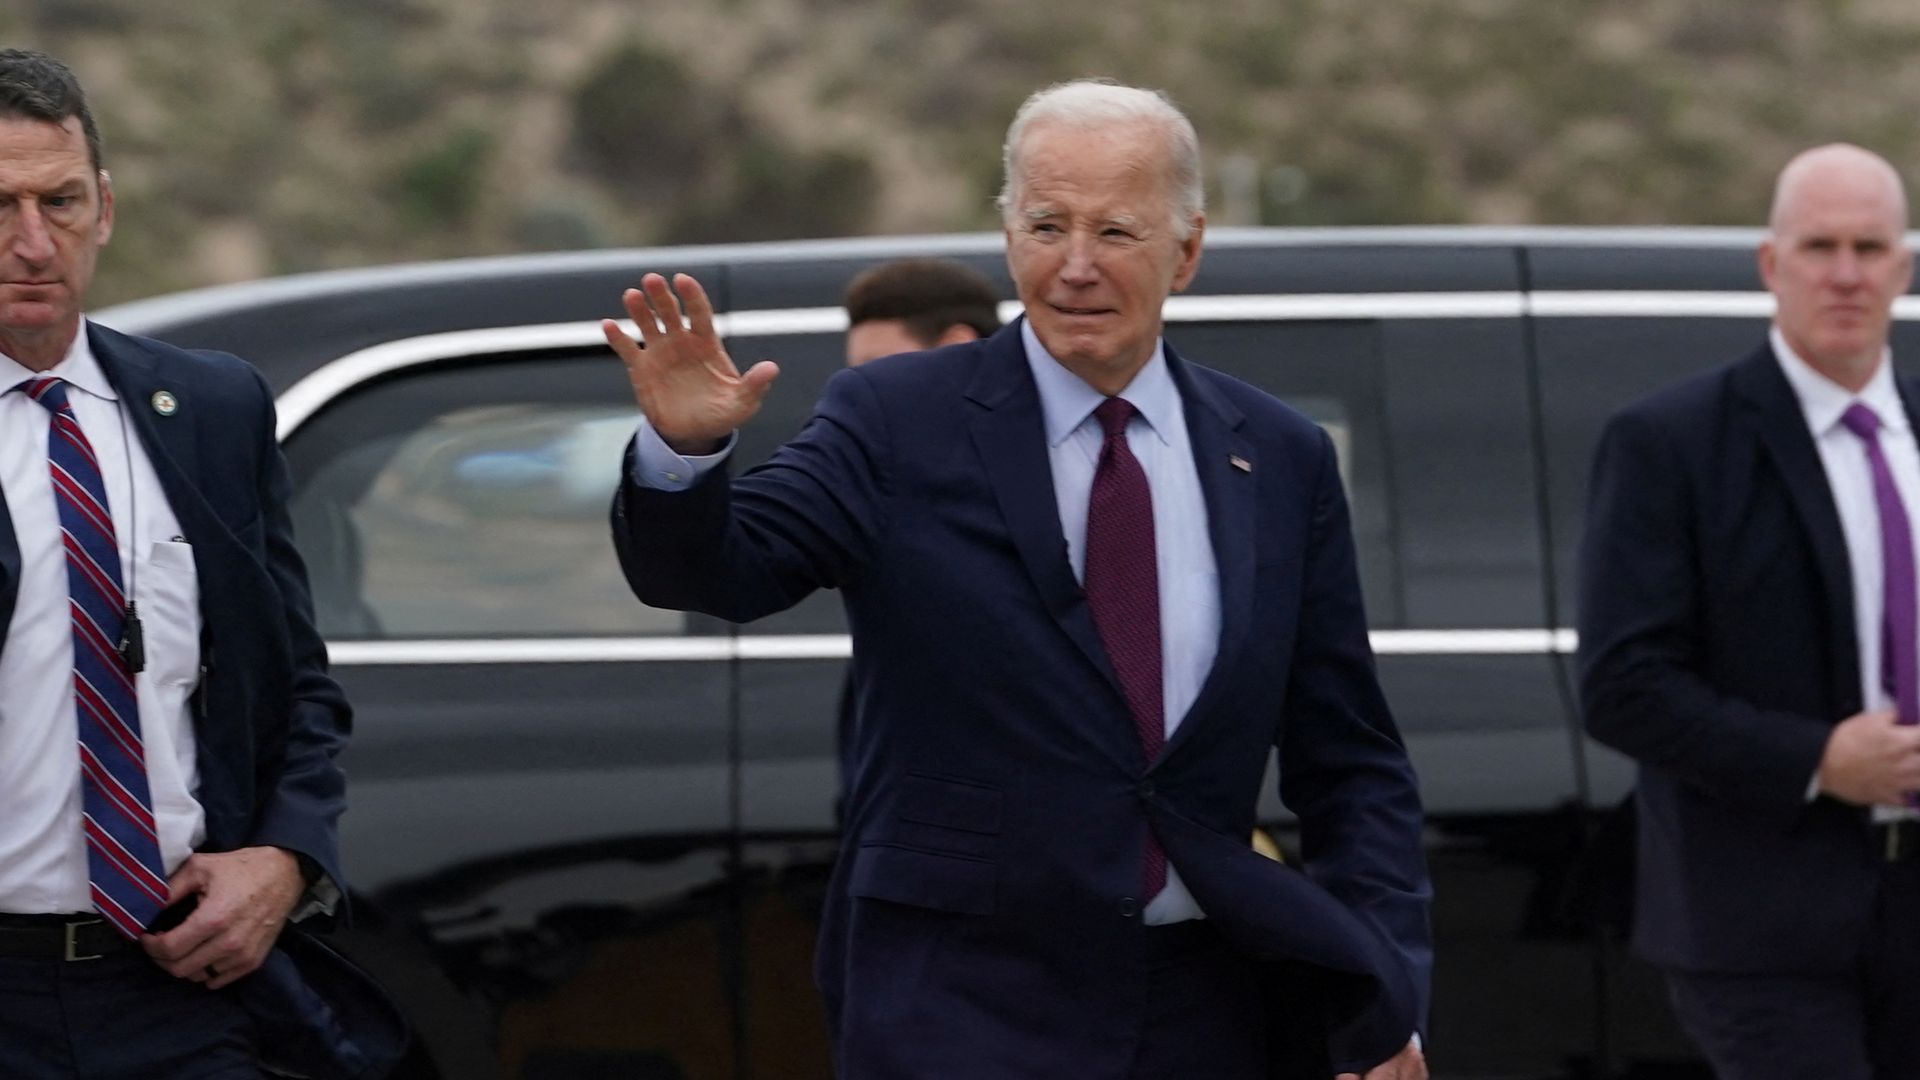 Biden has sought to appease Iran, even as Iran pledges “Death to America” and continues funding attacks against the United States.